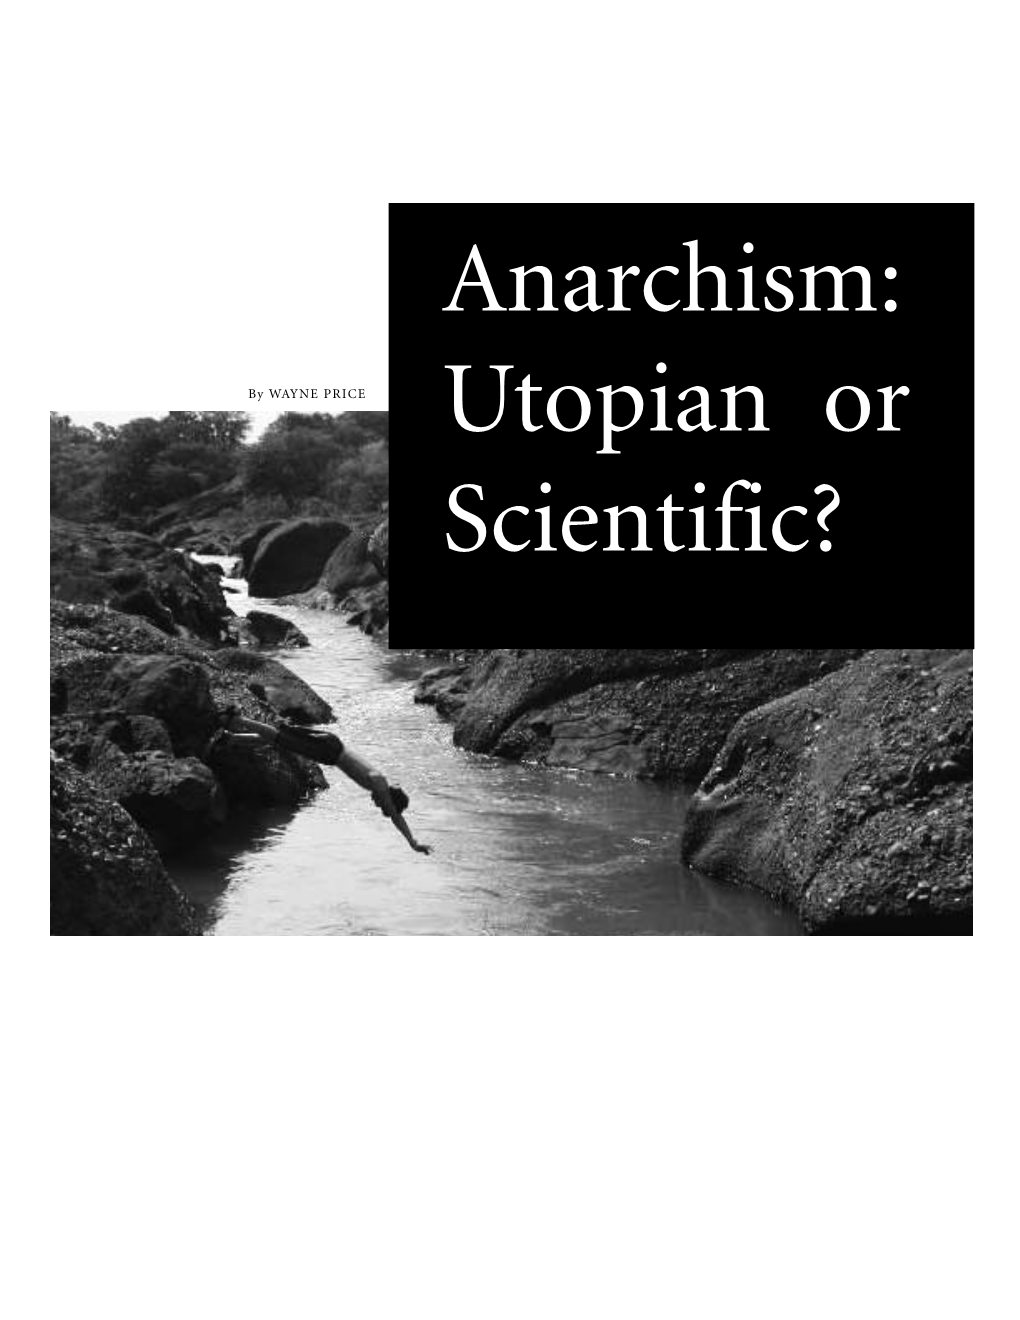 Anarchism: Utopian Or Scientific? Picture of an Ideal Society Whose Name Is “Nowhere” Spelled Limits the Opportunities for People to Become Corrupted by Backwards